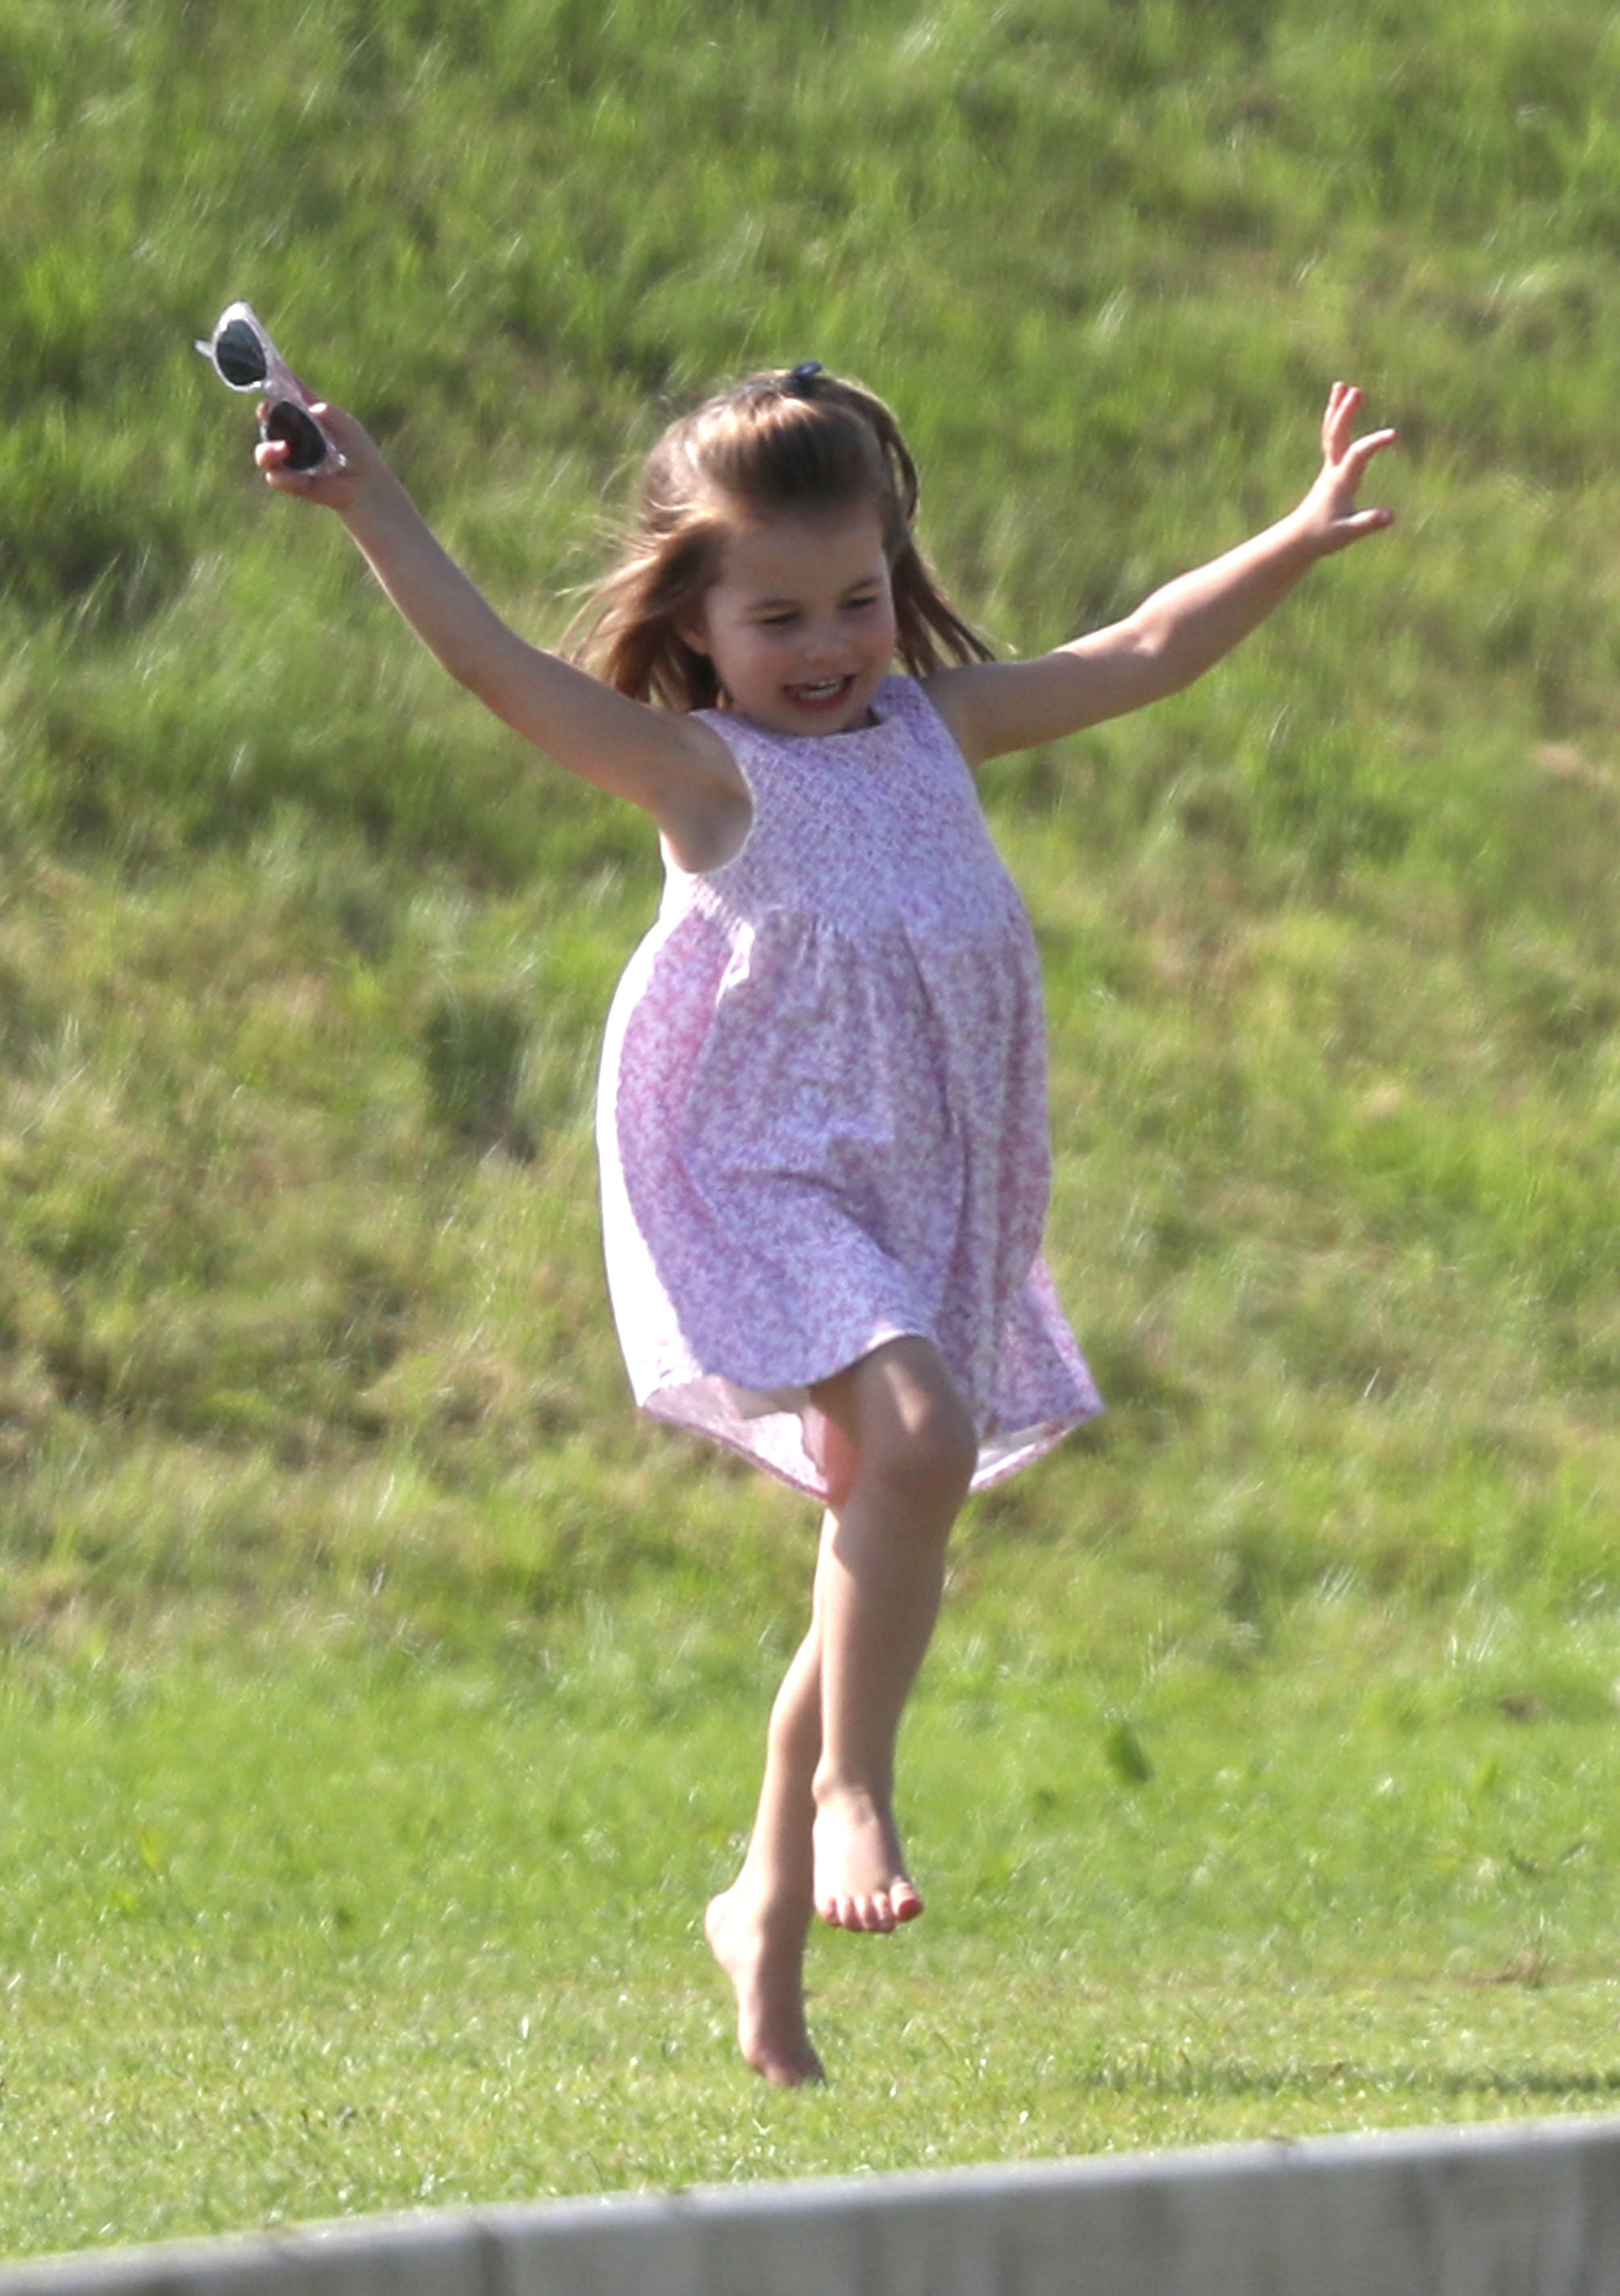 <p>Free as a bird! Princess Charlotte frolicked in the grass as her father, <a href="https://www.wonderwall.com/celebrity/profiles/overview/prince-william-482.article">Prince William</a>, played in the Maserati Royal Charity Polo Trophy match at Beaufort Park in Gloucester, England, on June 10, 2018.</p>